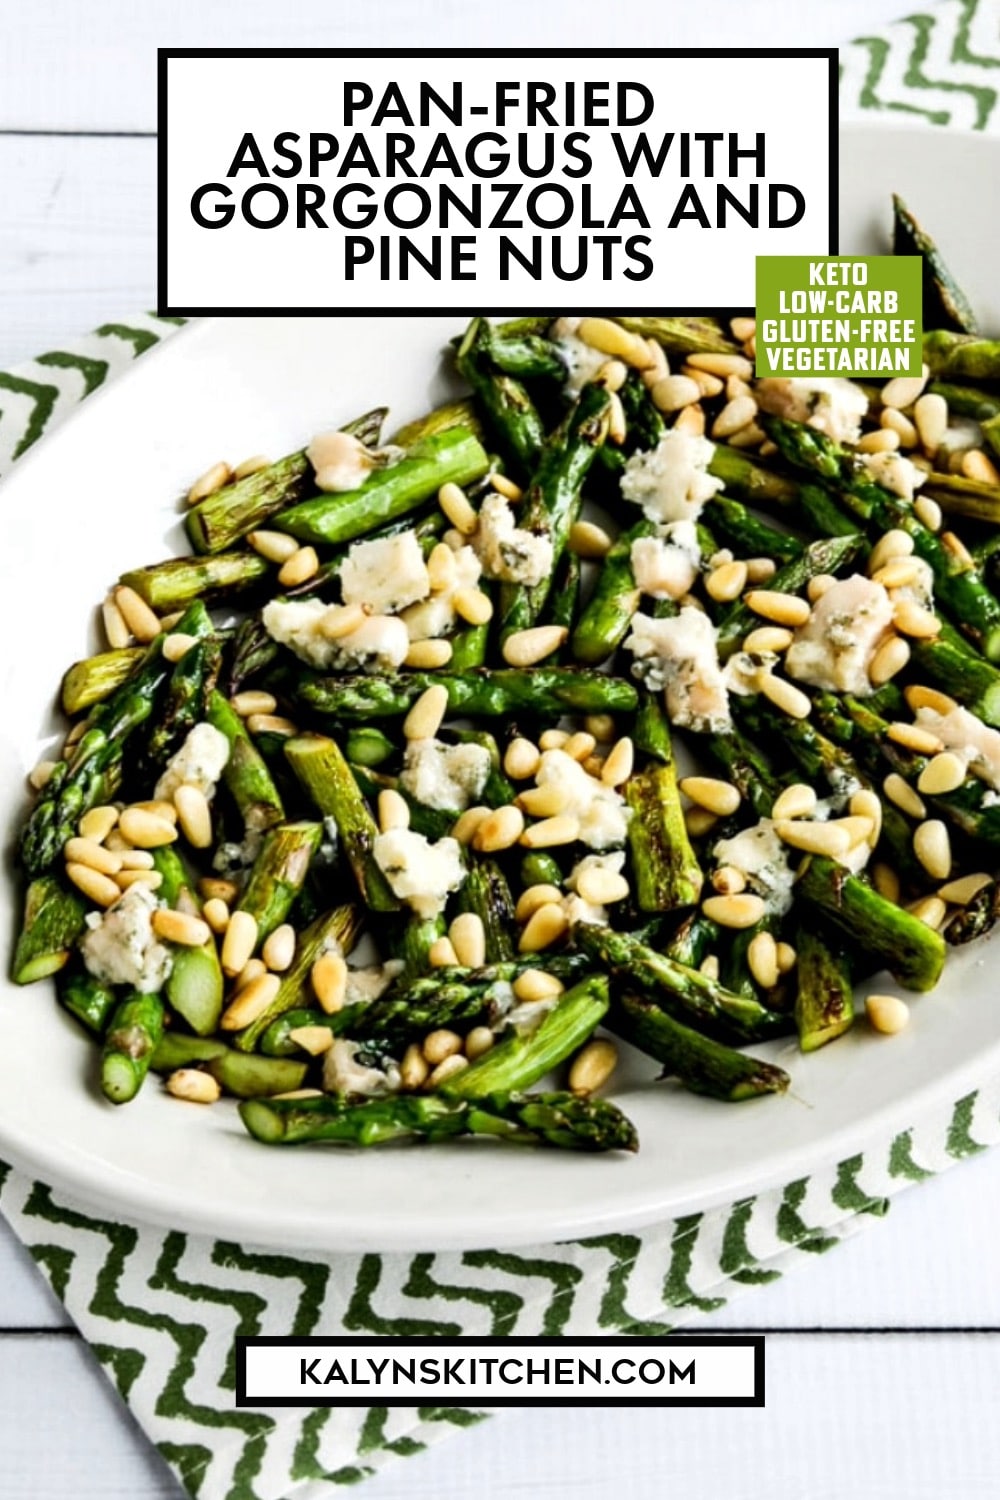 Pinterest image of Pan-Fried Asparagus with Gorgonzola and Pine Nuts